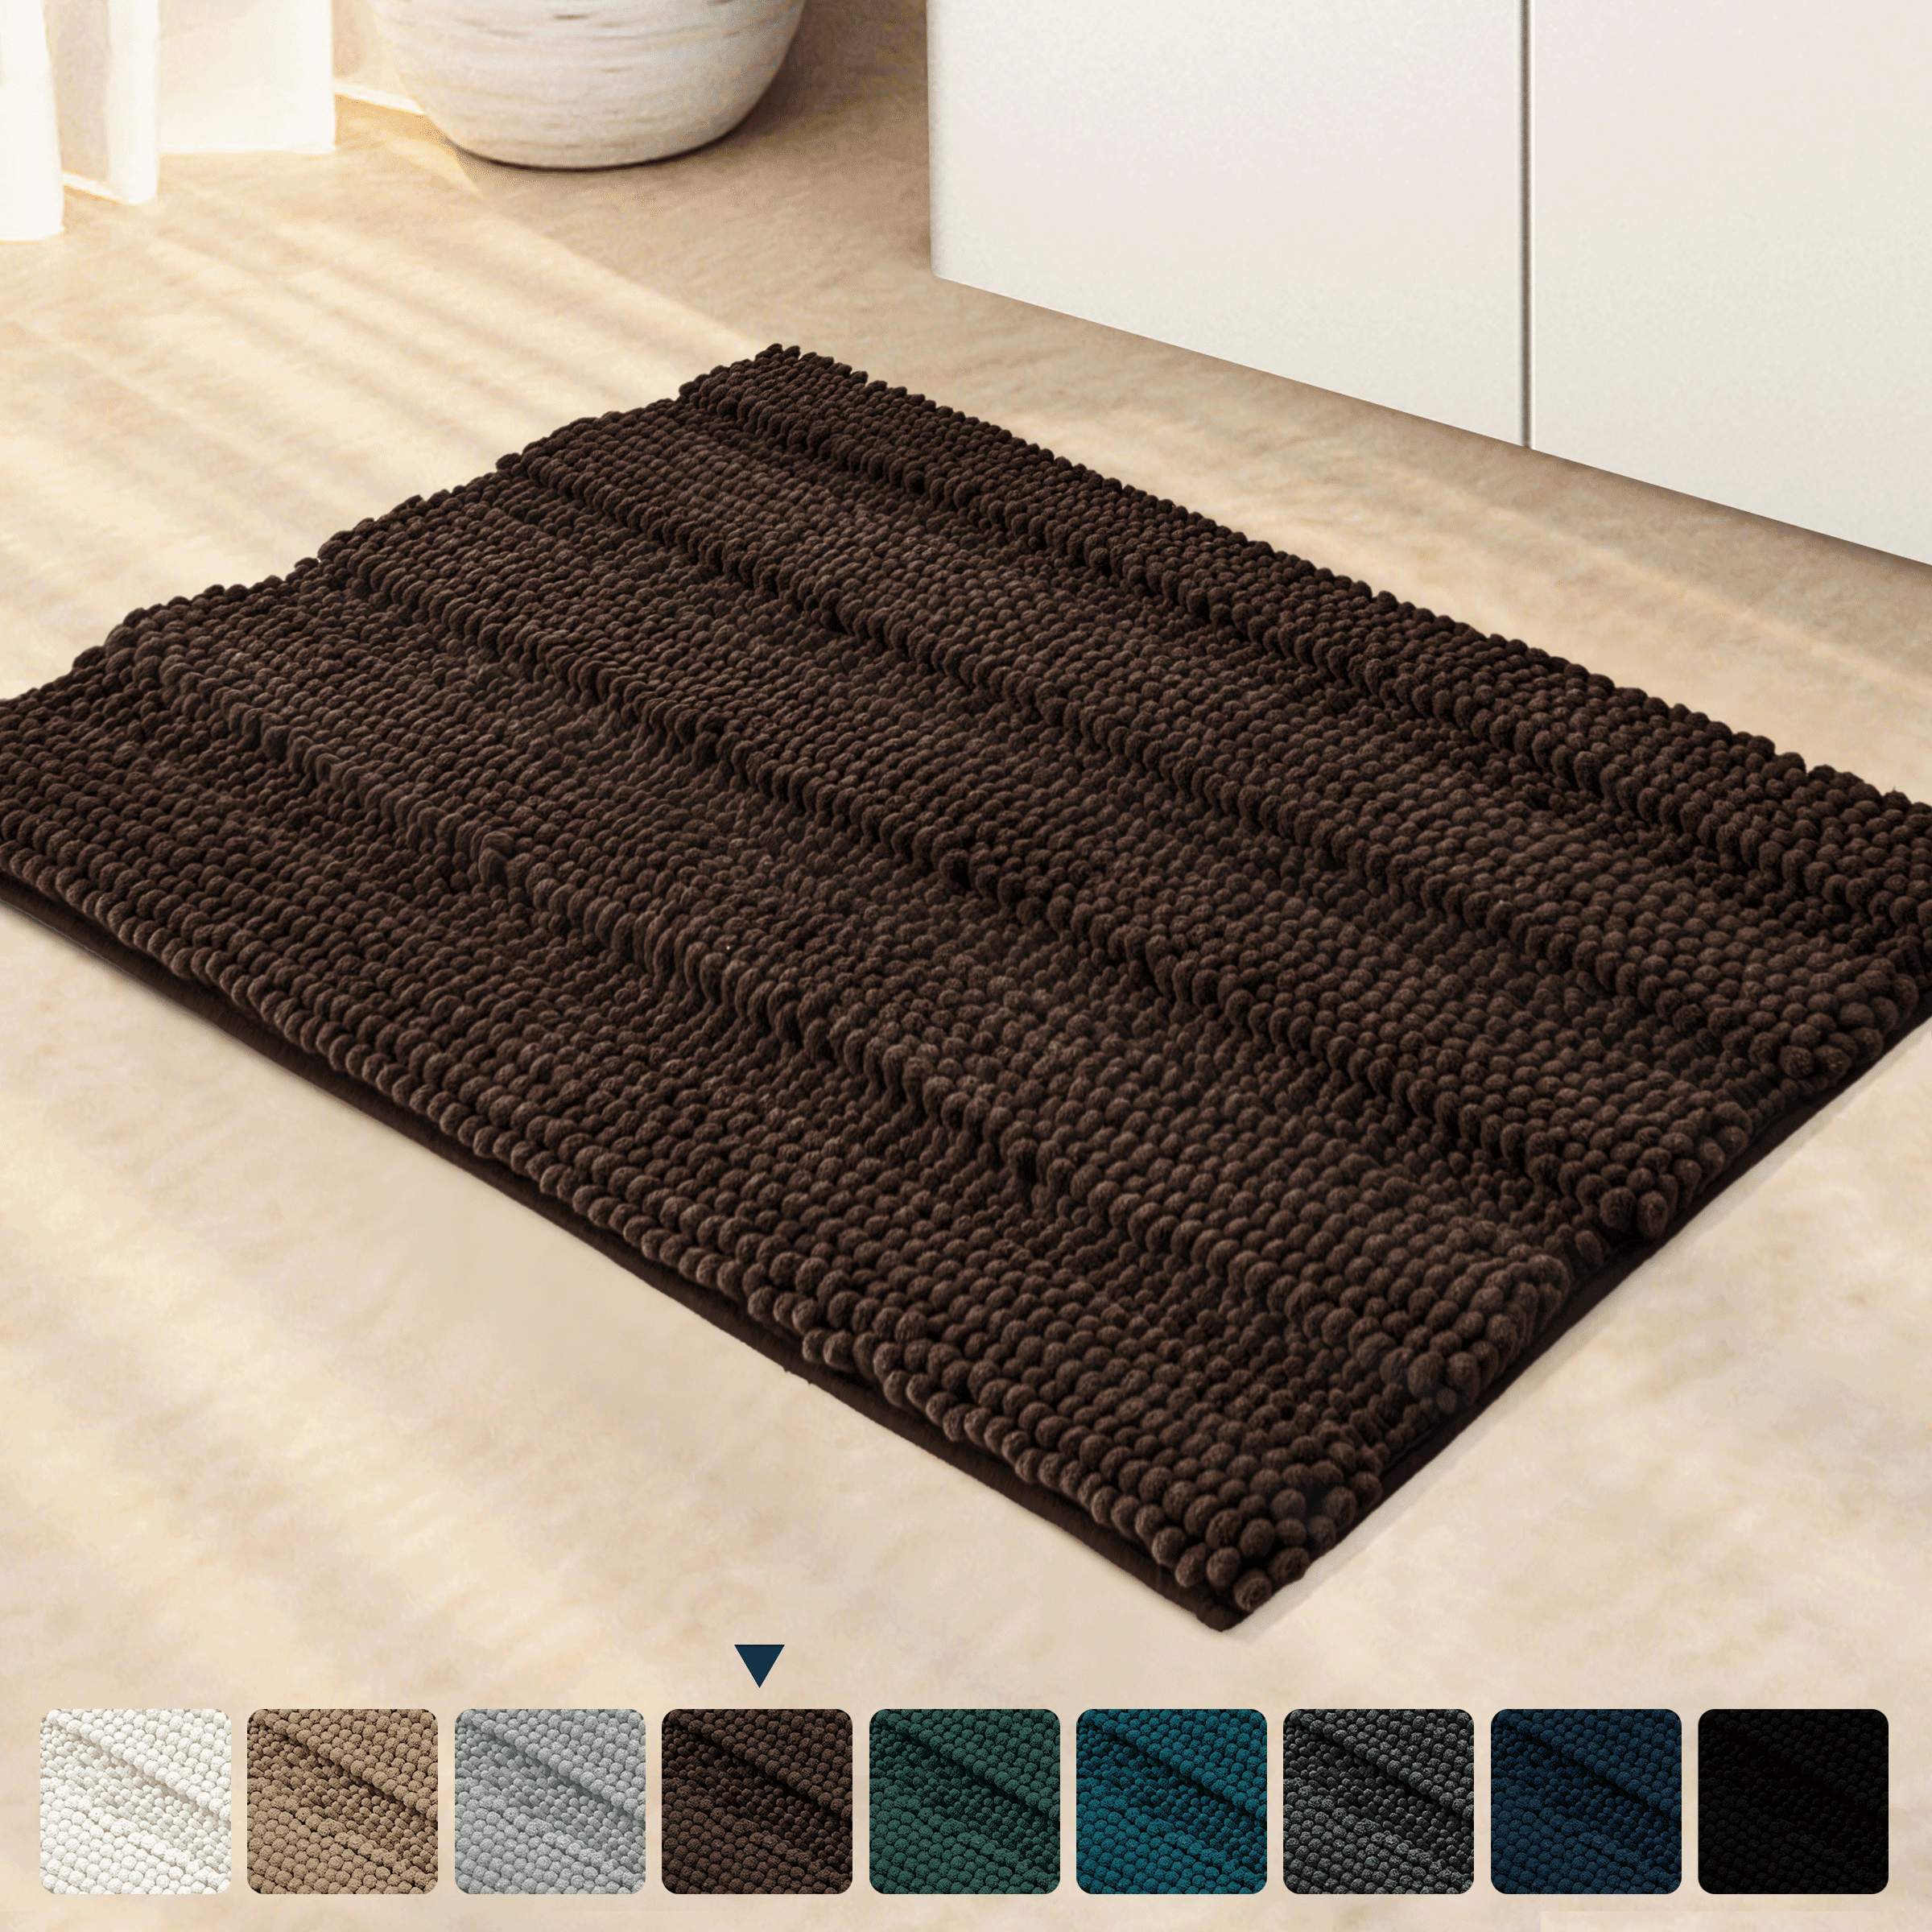 Details about   Easy-Going Luxury Chenille Striped Pattern Bath Mat 18x25 in Soft Plush Bath R 